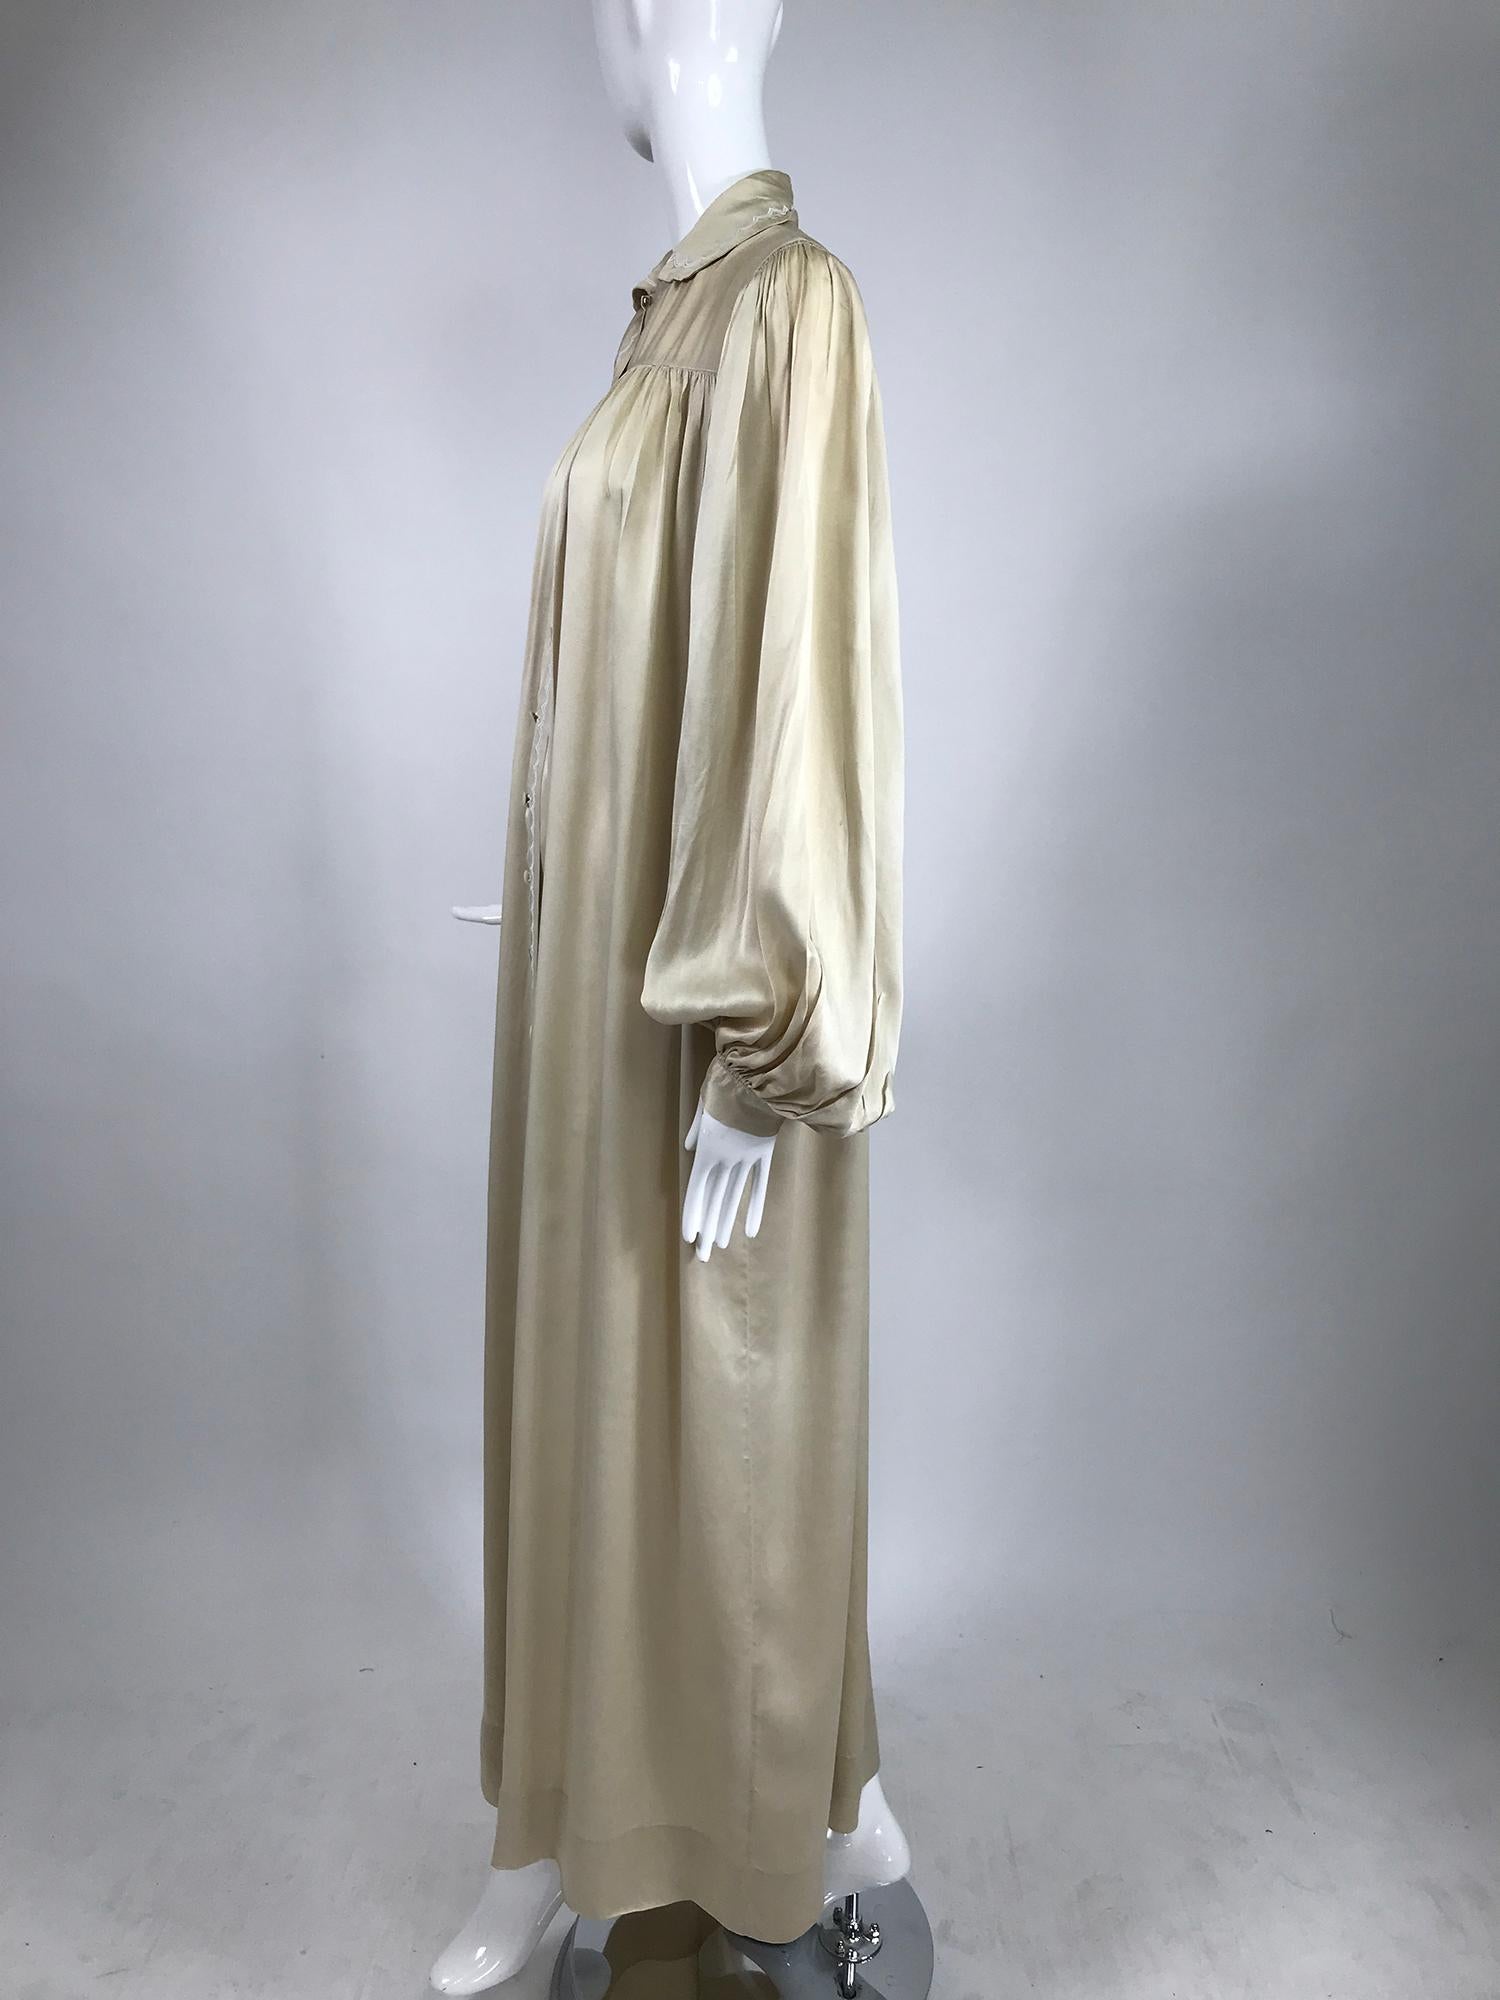 1940s Handmade champagne silk hand embroidered in silk, bishop sleeve robe. Sophisticated robe that would have been at home worn by Katherine Hepburn. It has a tailored style as opposed to fluffy girly. Very long full bishop sleeves are densely